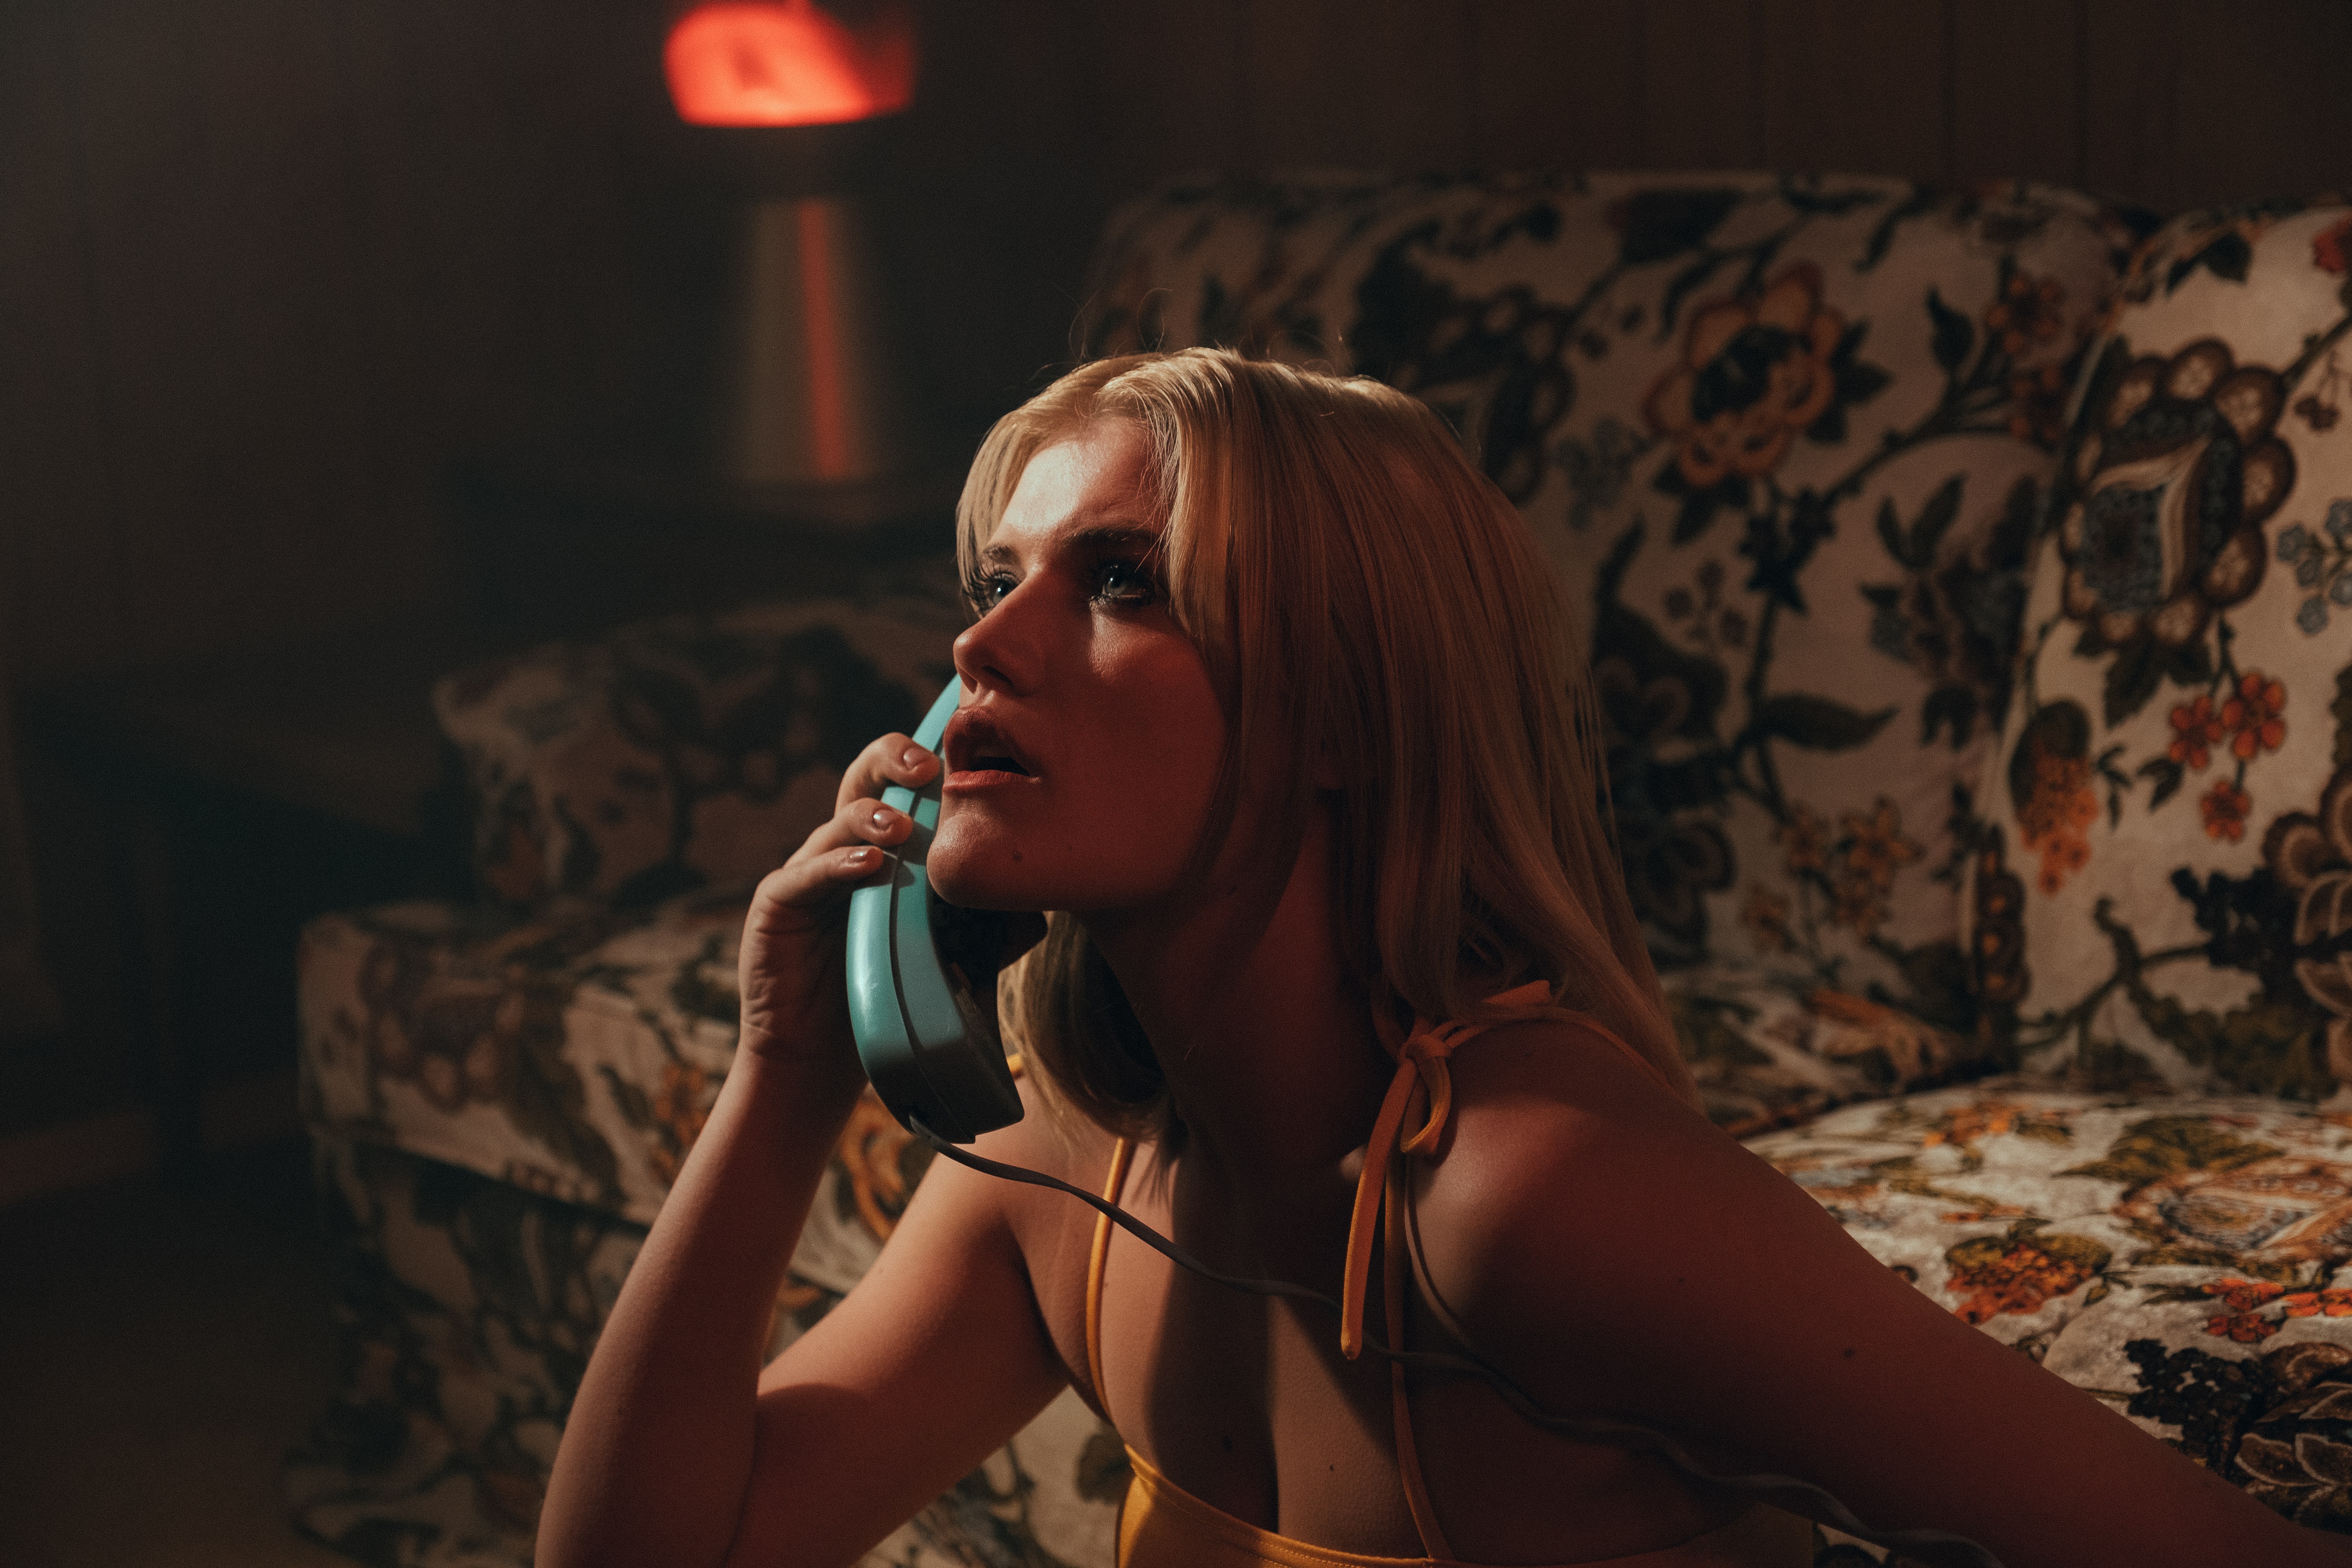 Photo by Jakob Owens on Unsplash. A woman sitting in a living room holding the telephone receiver to her ear.